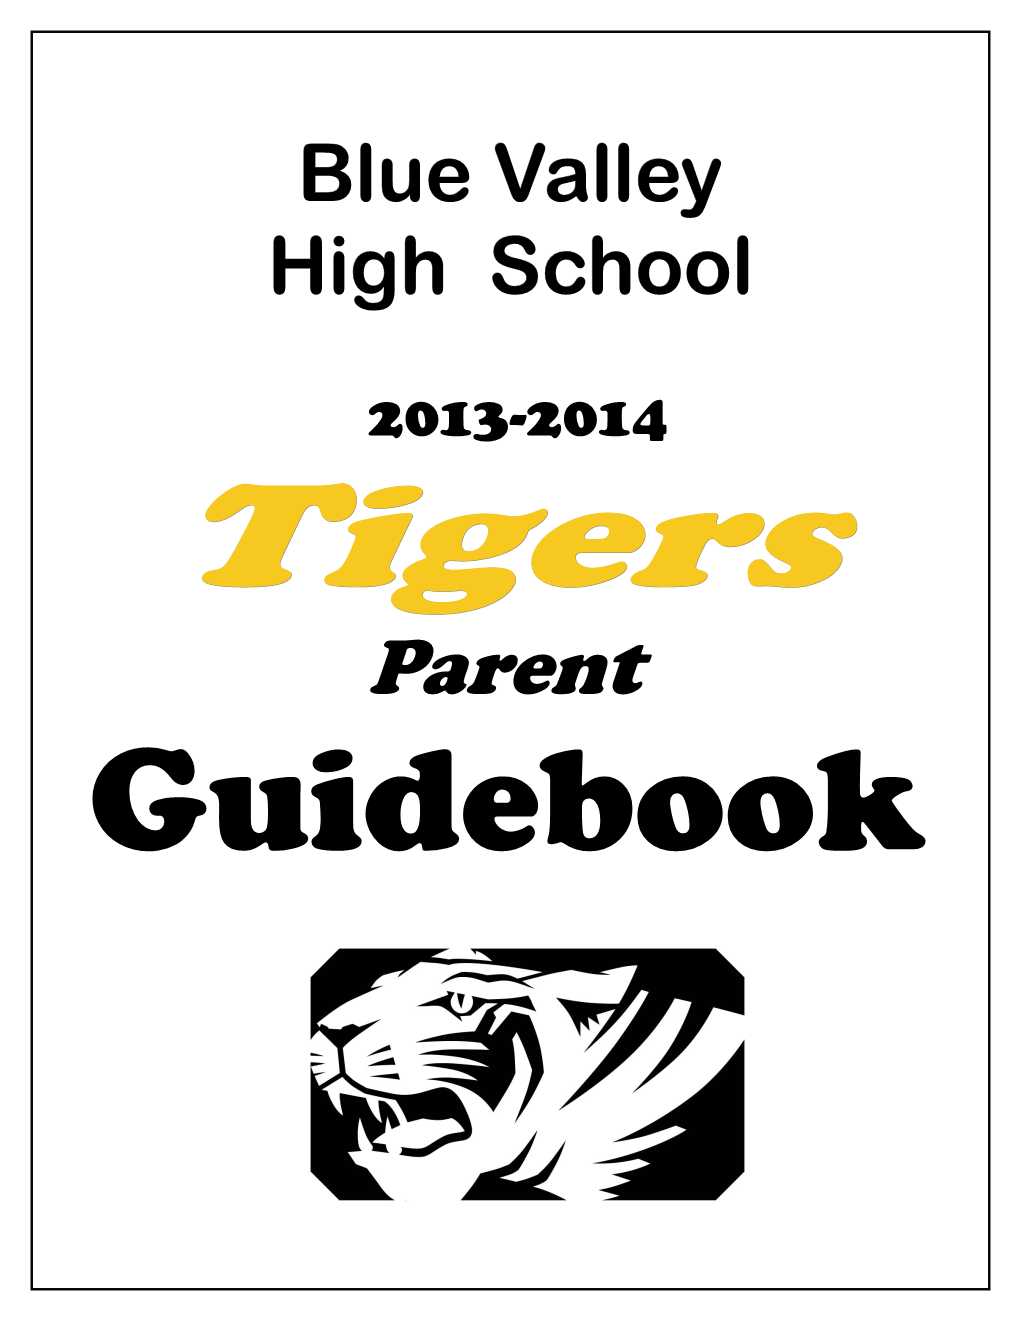 Parent Guidebook BLUE VALLEY HIGH SCHOOL IMPORTANT INFORMATION for PARENTS